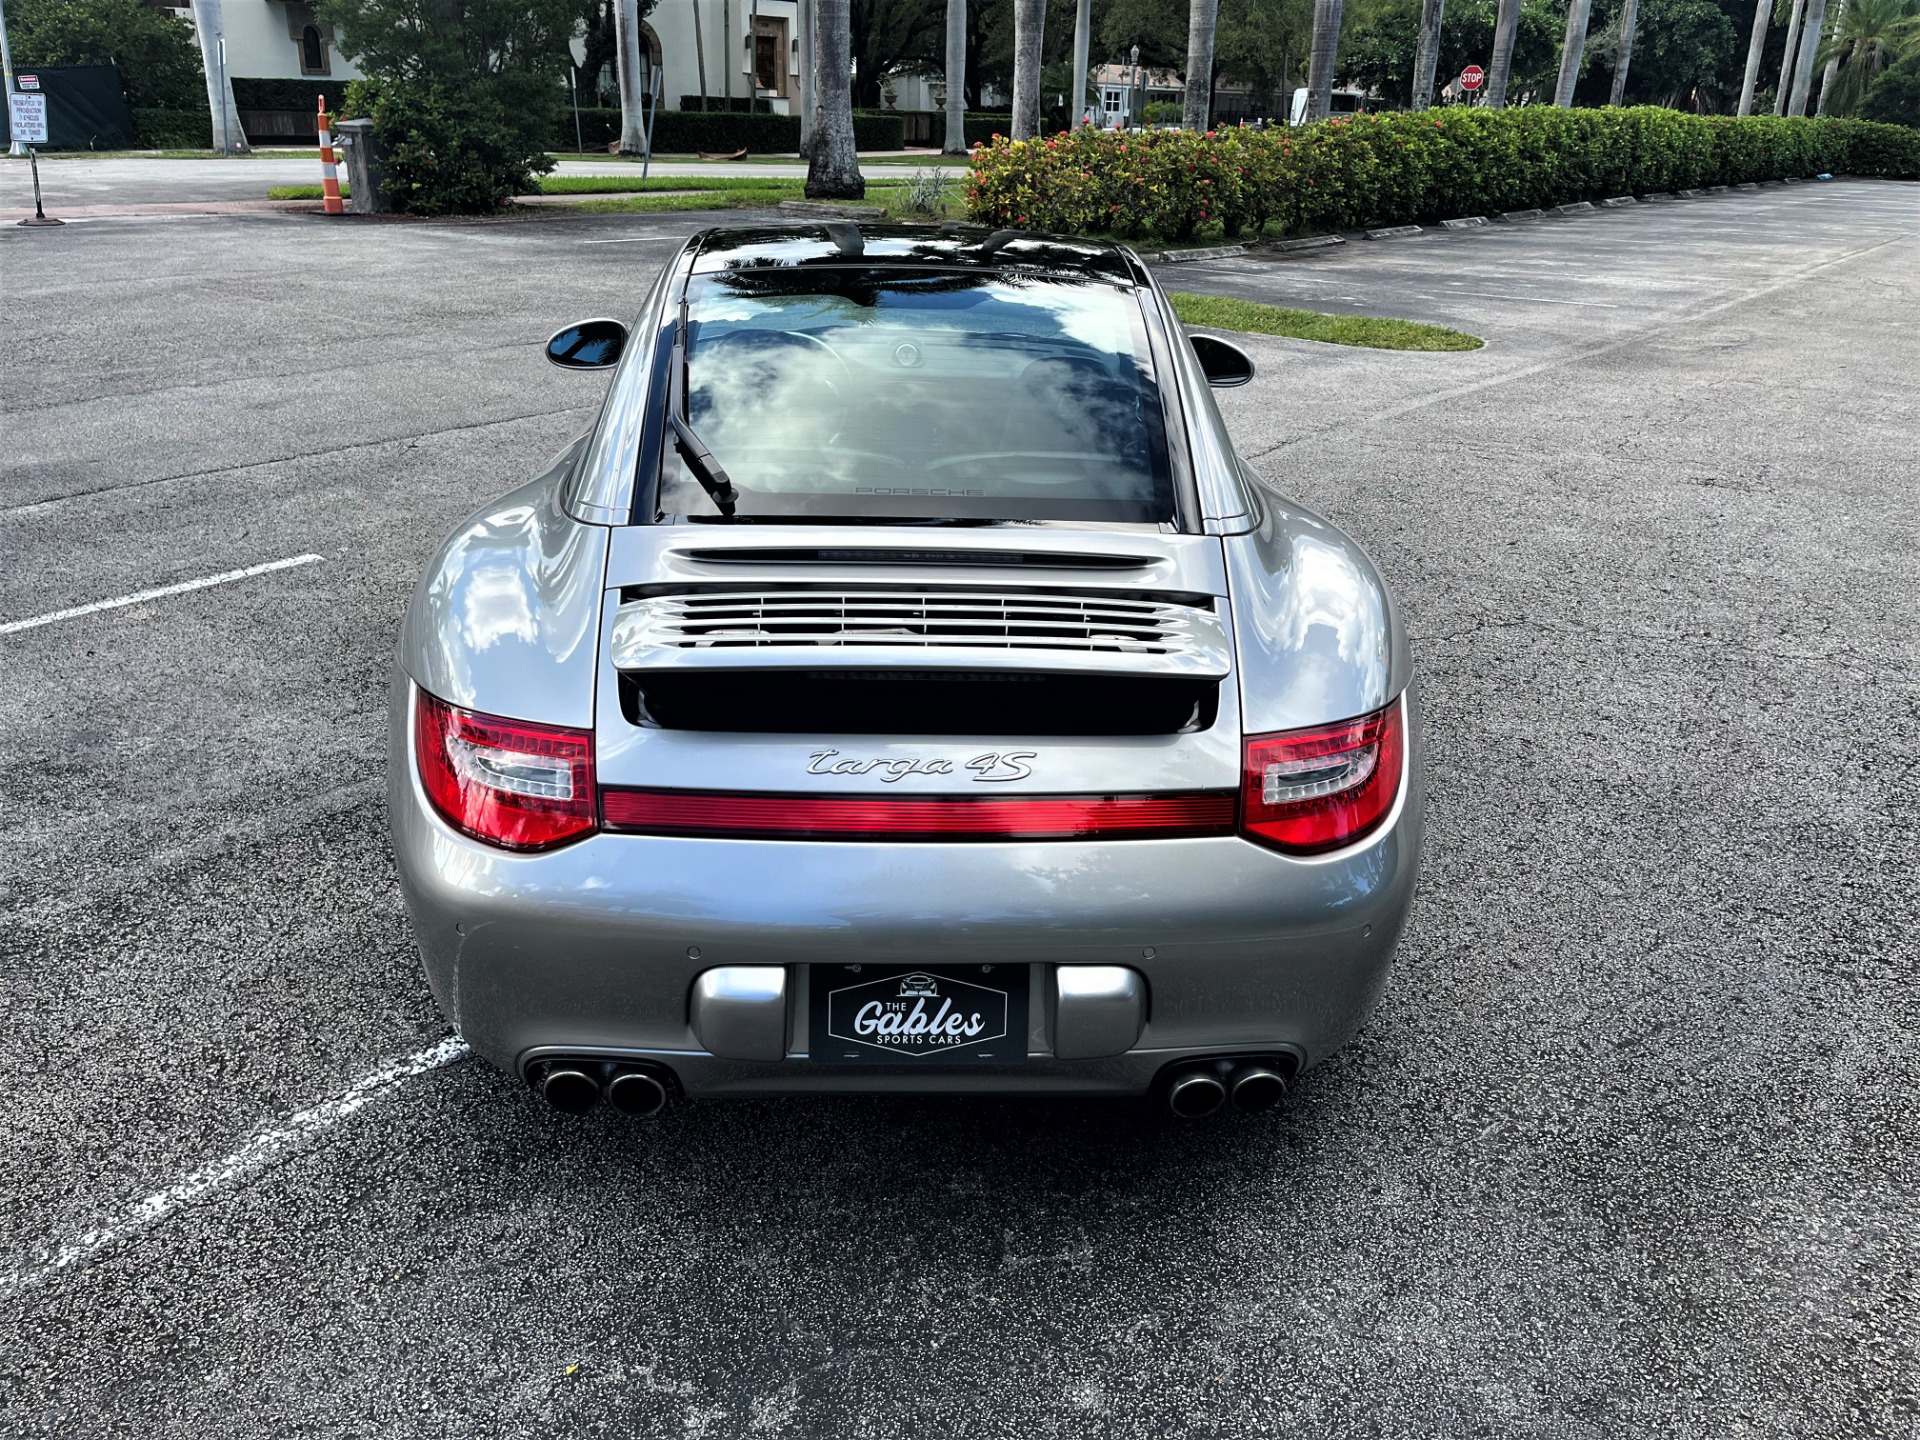 Used 2011 Porsche 911 Targa 4S for sale $85,850 at The Gables Sports Cars in Miami FL 33146 3